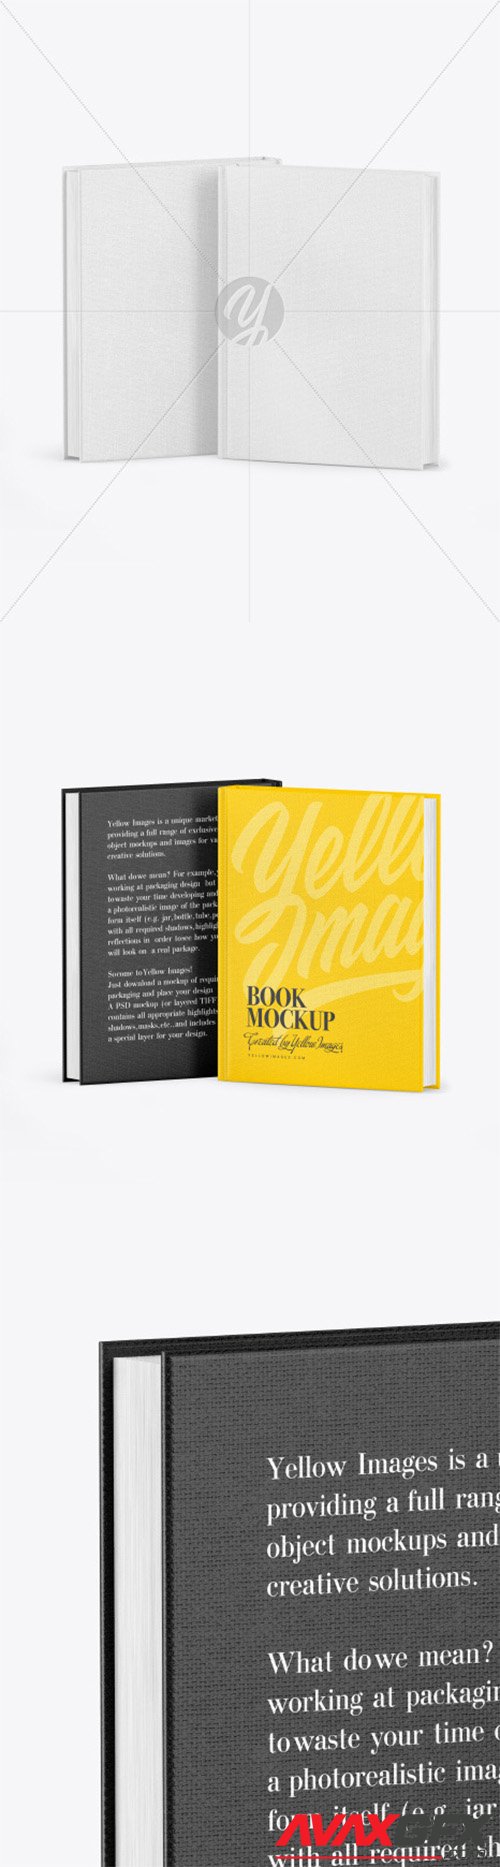 Two Hardcover Books w/ Fabric Covers Mockup 80361